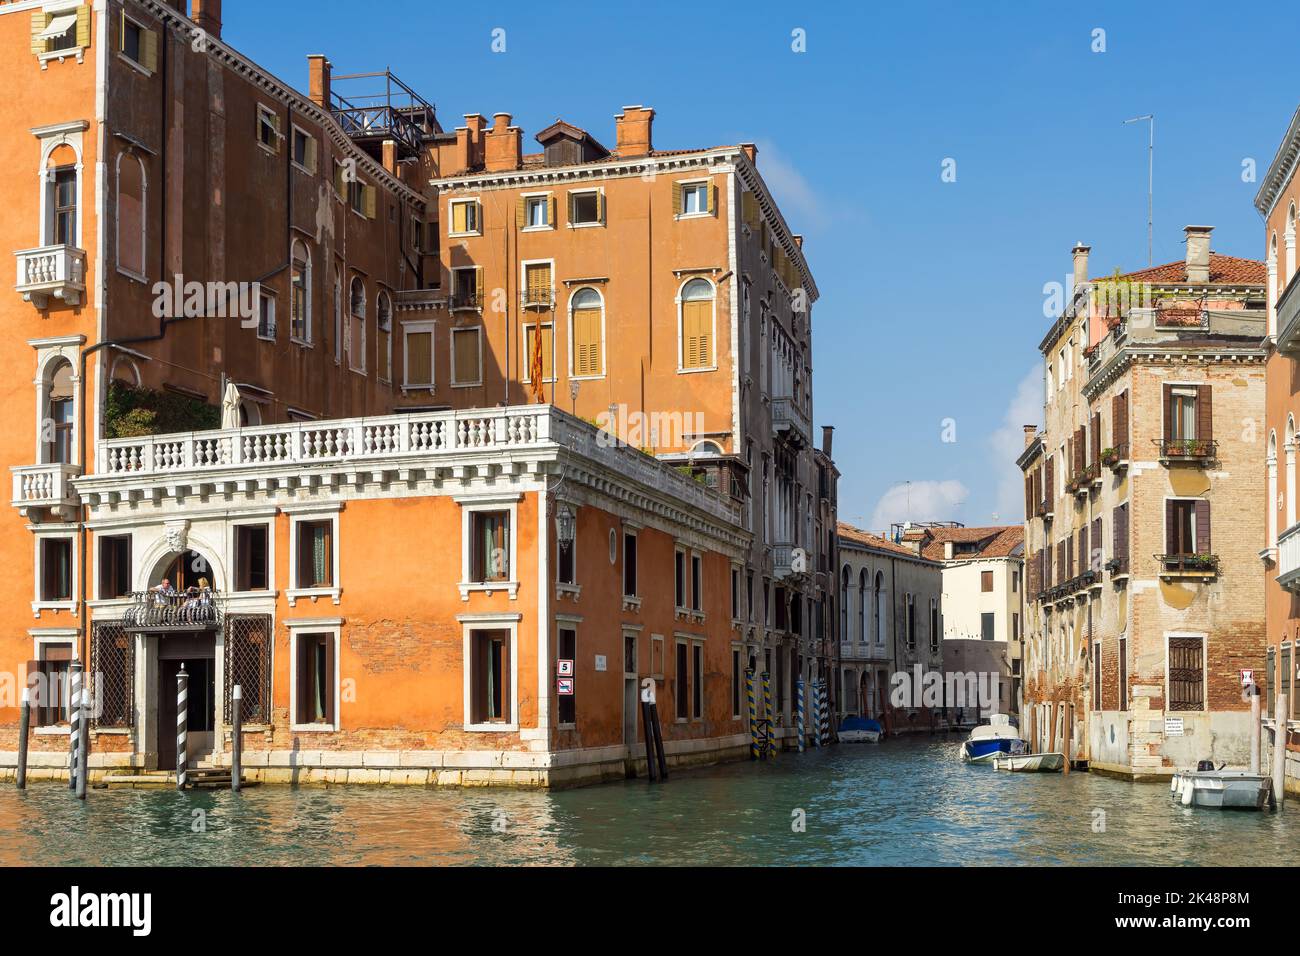 VENICE, ITALY - OCTOBER 12 : Colourful buildings along a canal in Venice on October 12, 2014. Two unidentified people. Stock Photo